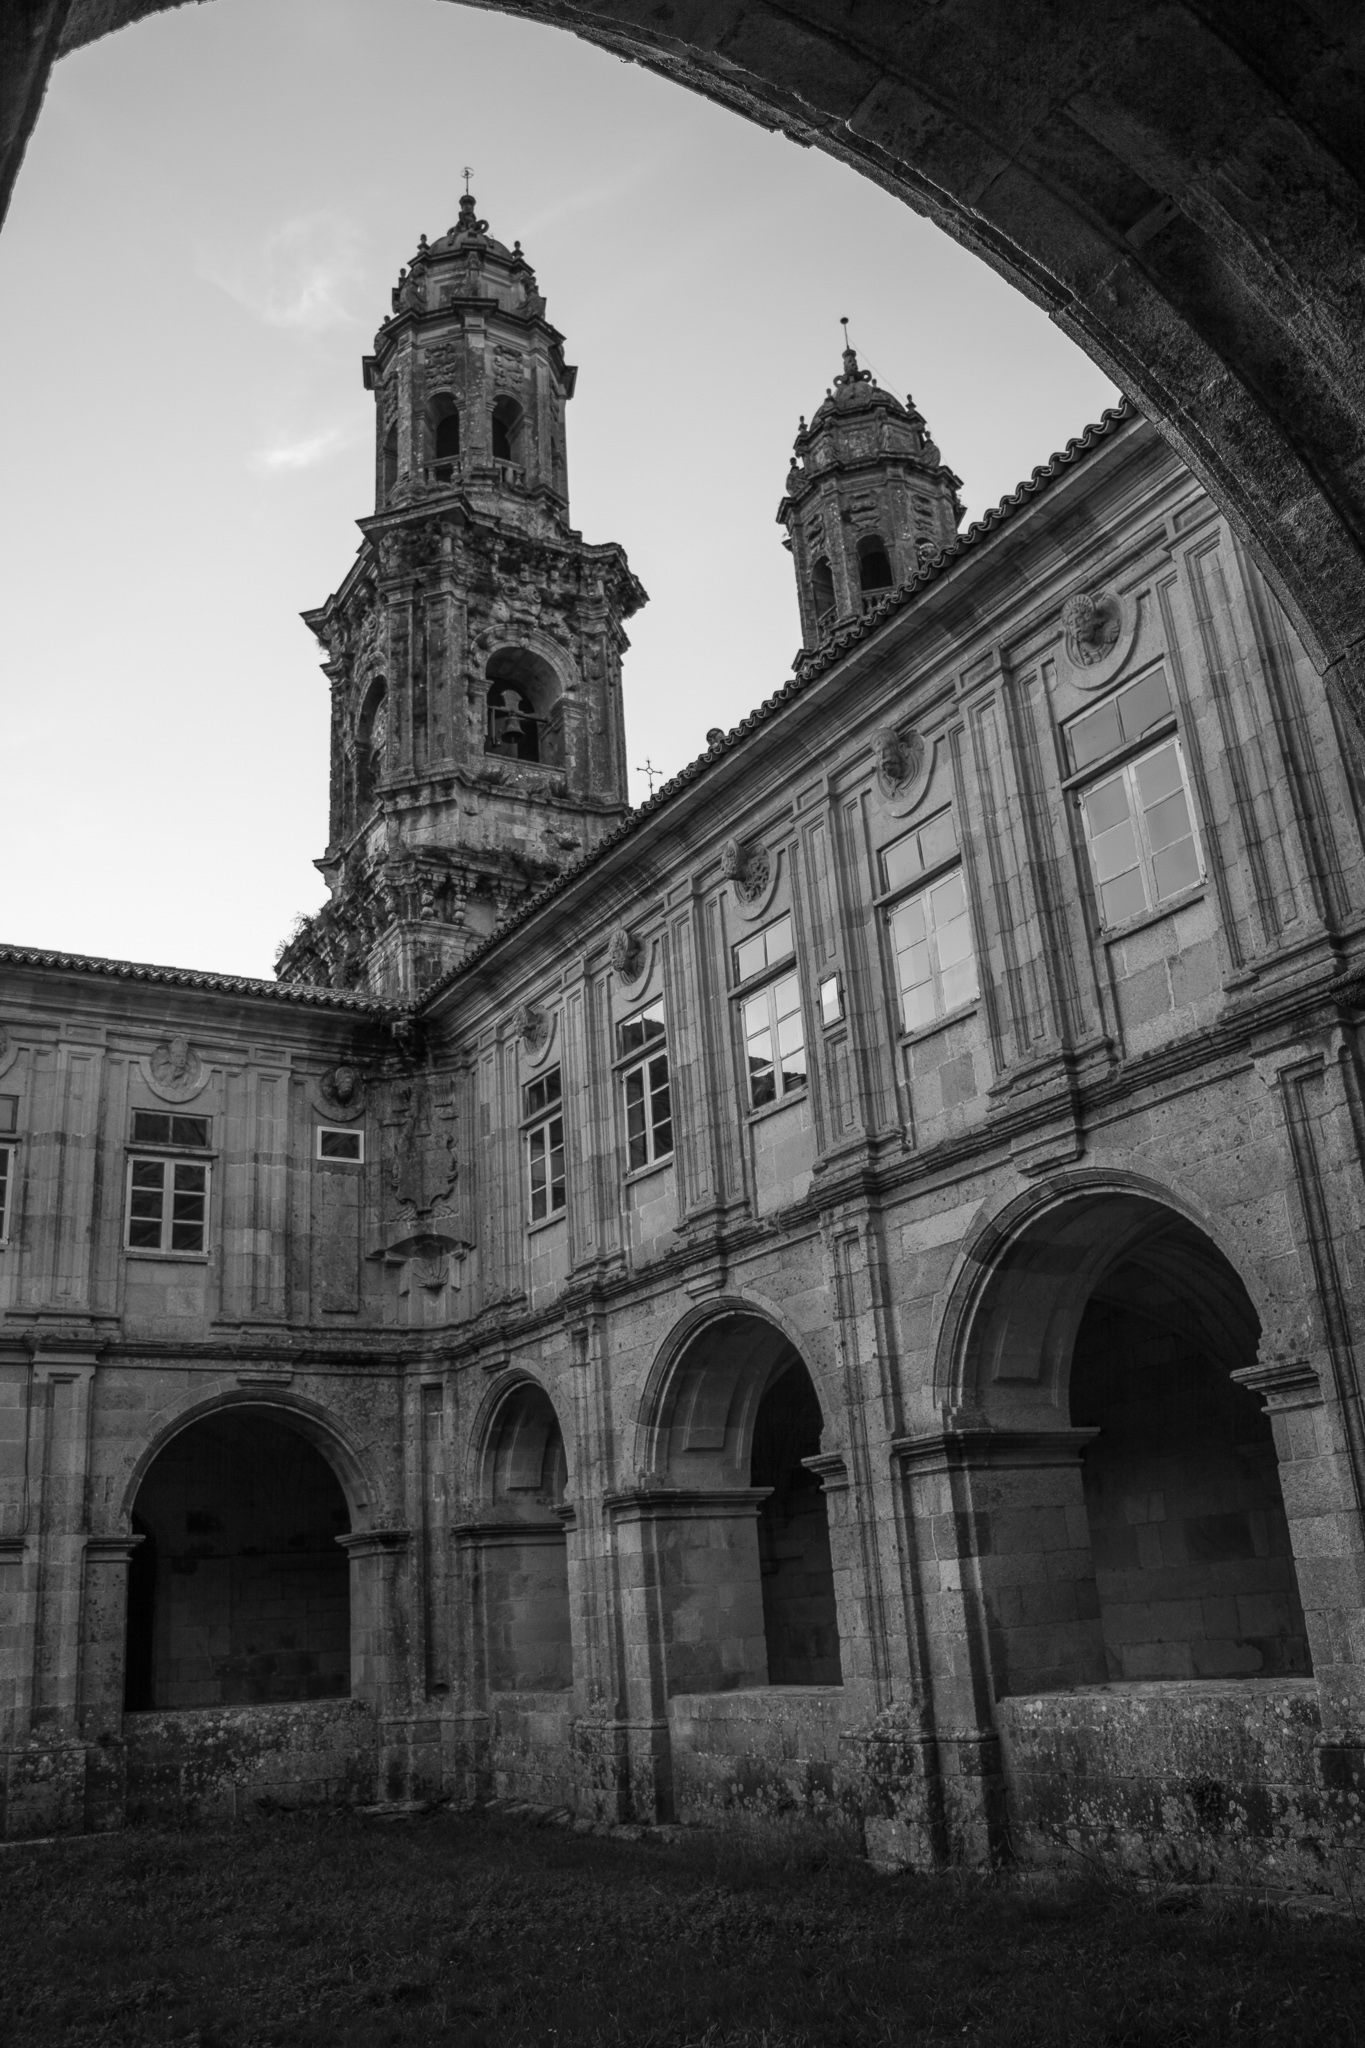 The monastery of Santa Maria de Sobrado dos Monxes, municipality of Sobrado, is one of the main medieval monasteries of Galicia. <br>Declared National Artistic Historical Monument, after the reforms of the centuries XVI to XVIII, it also became one of the main monuments of Galician baroque.